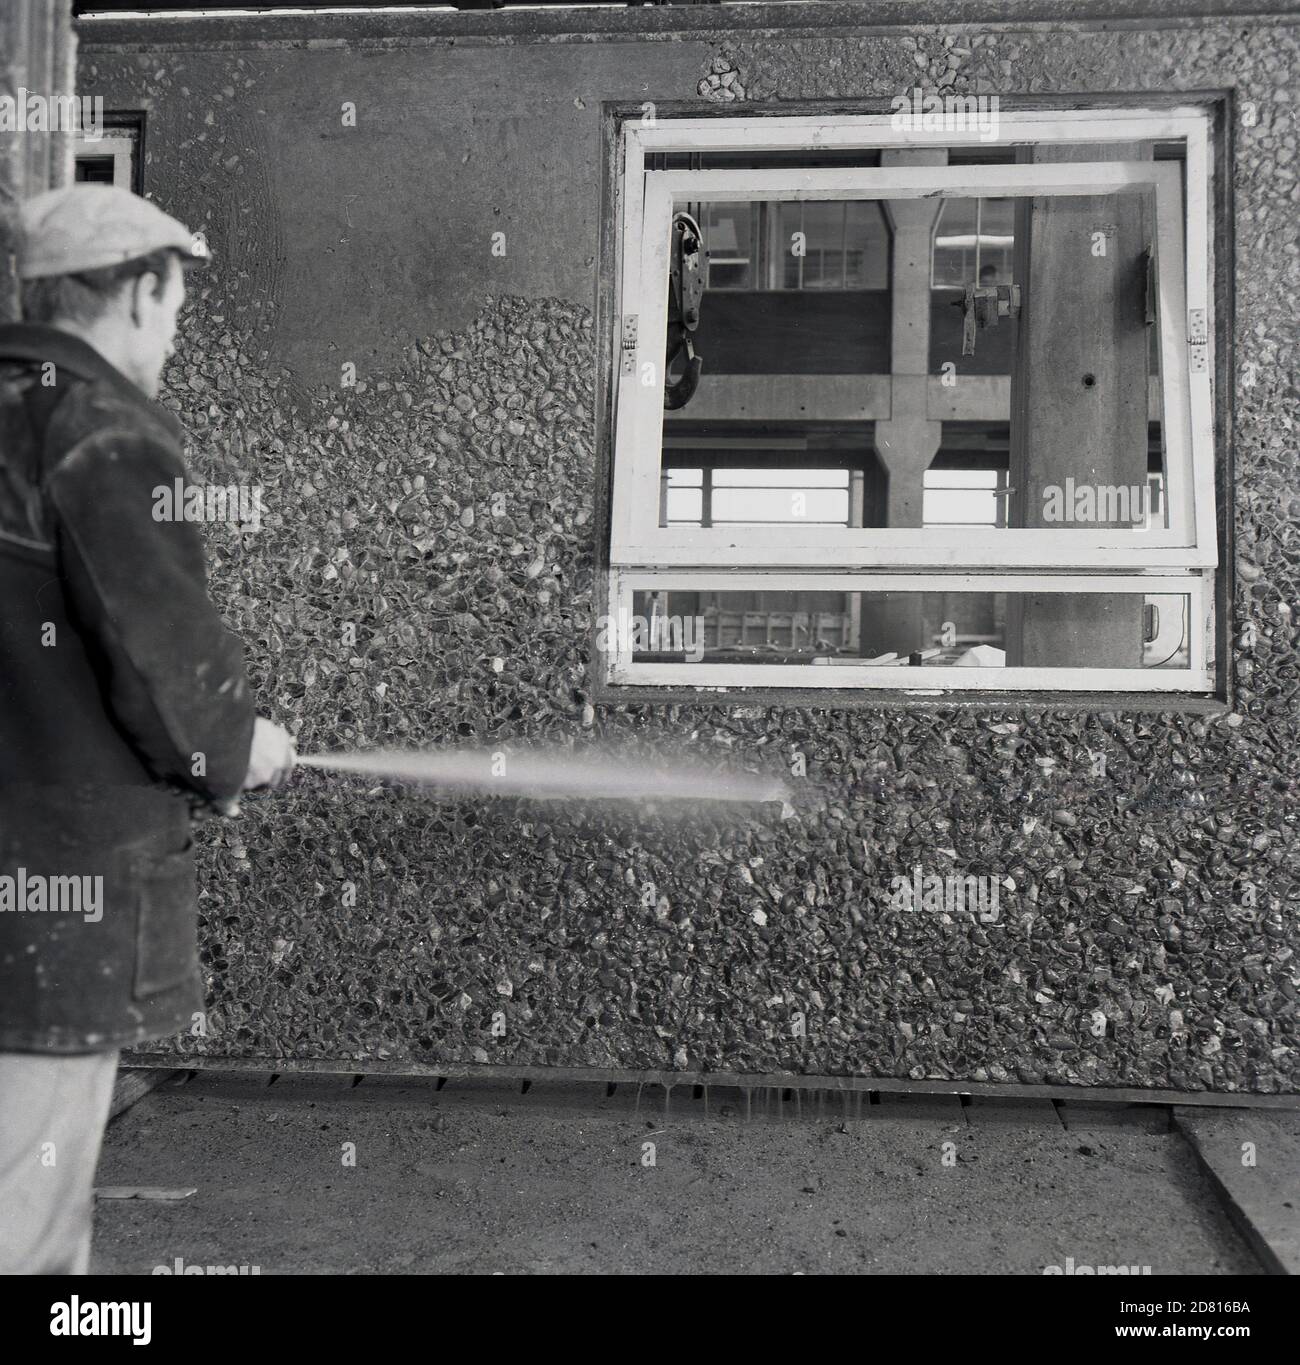 1960s, historical, a workman washing down a newly constructed precast concrete panel for external use, with a pebbledash exterior and built-in wooden windows, England, UK.  It was in this era that the precast concrete method of building modern offices and tower blocks became popular, as they could be built off-site and so reducing the need for large numbers of skilled workers and materials such as bricks, thereby reducing overall costs and speeding up the build. Stock Photo